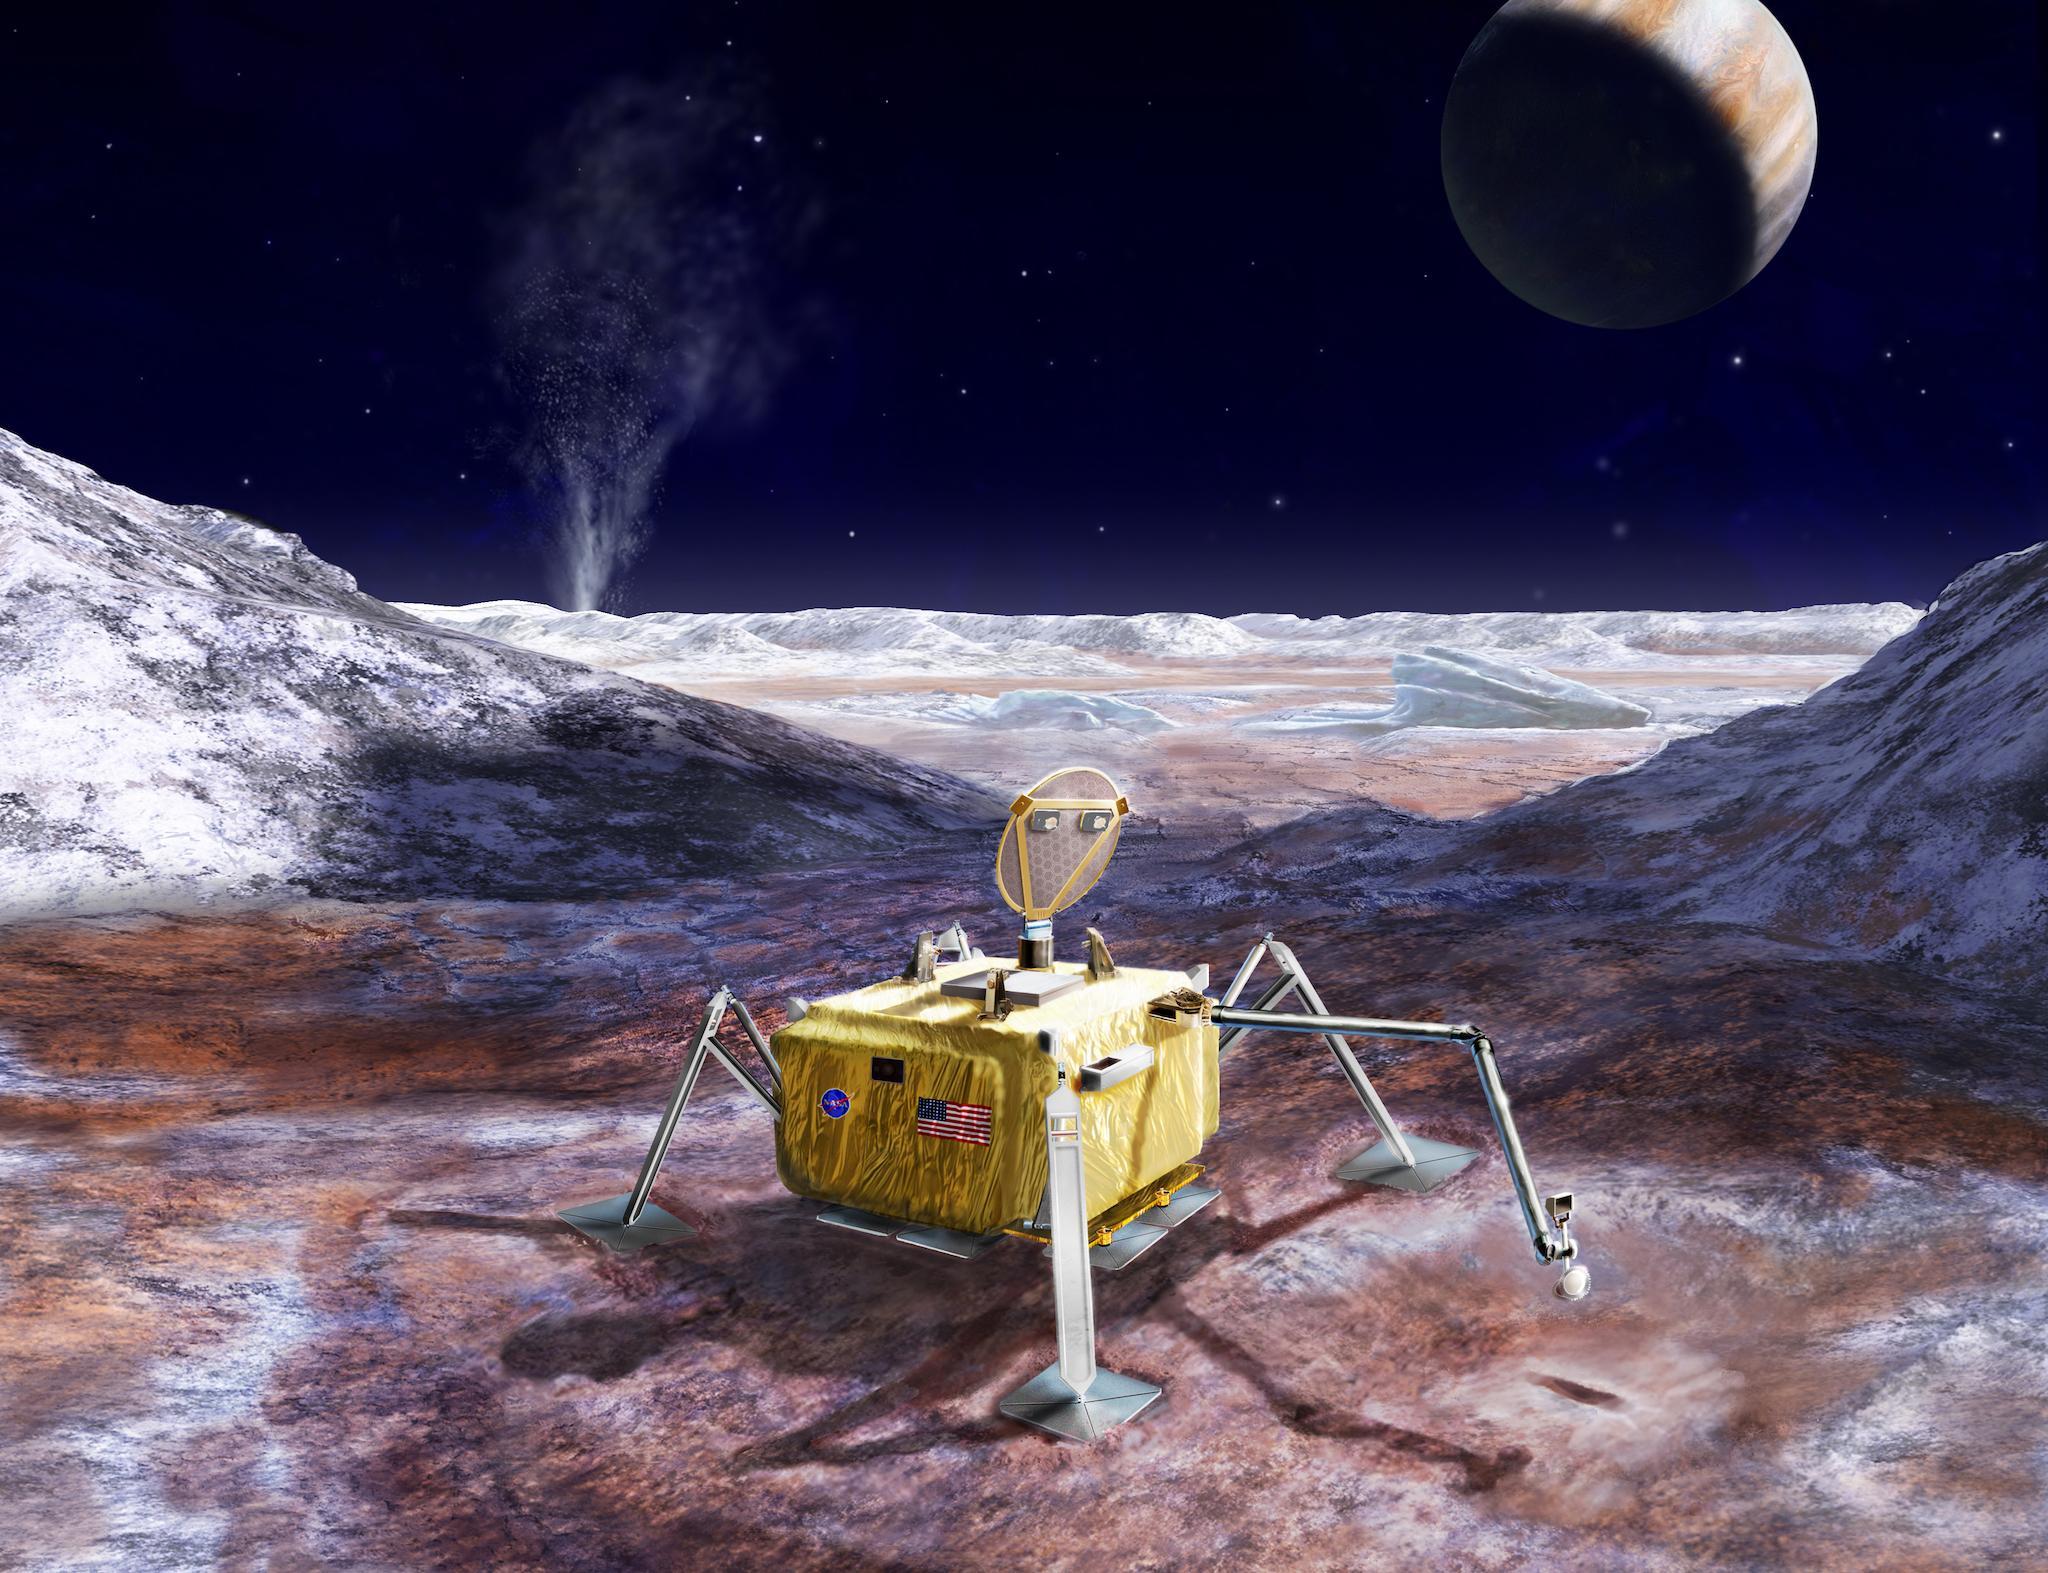 An artist’s rendering illustrates a conceptual design for a potential future mission to land a robotic probe on the surface of Jupiter’s moon Europa